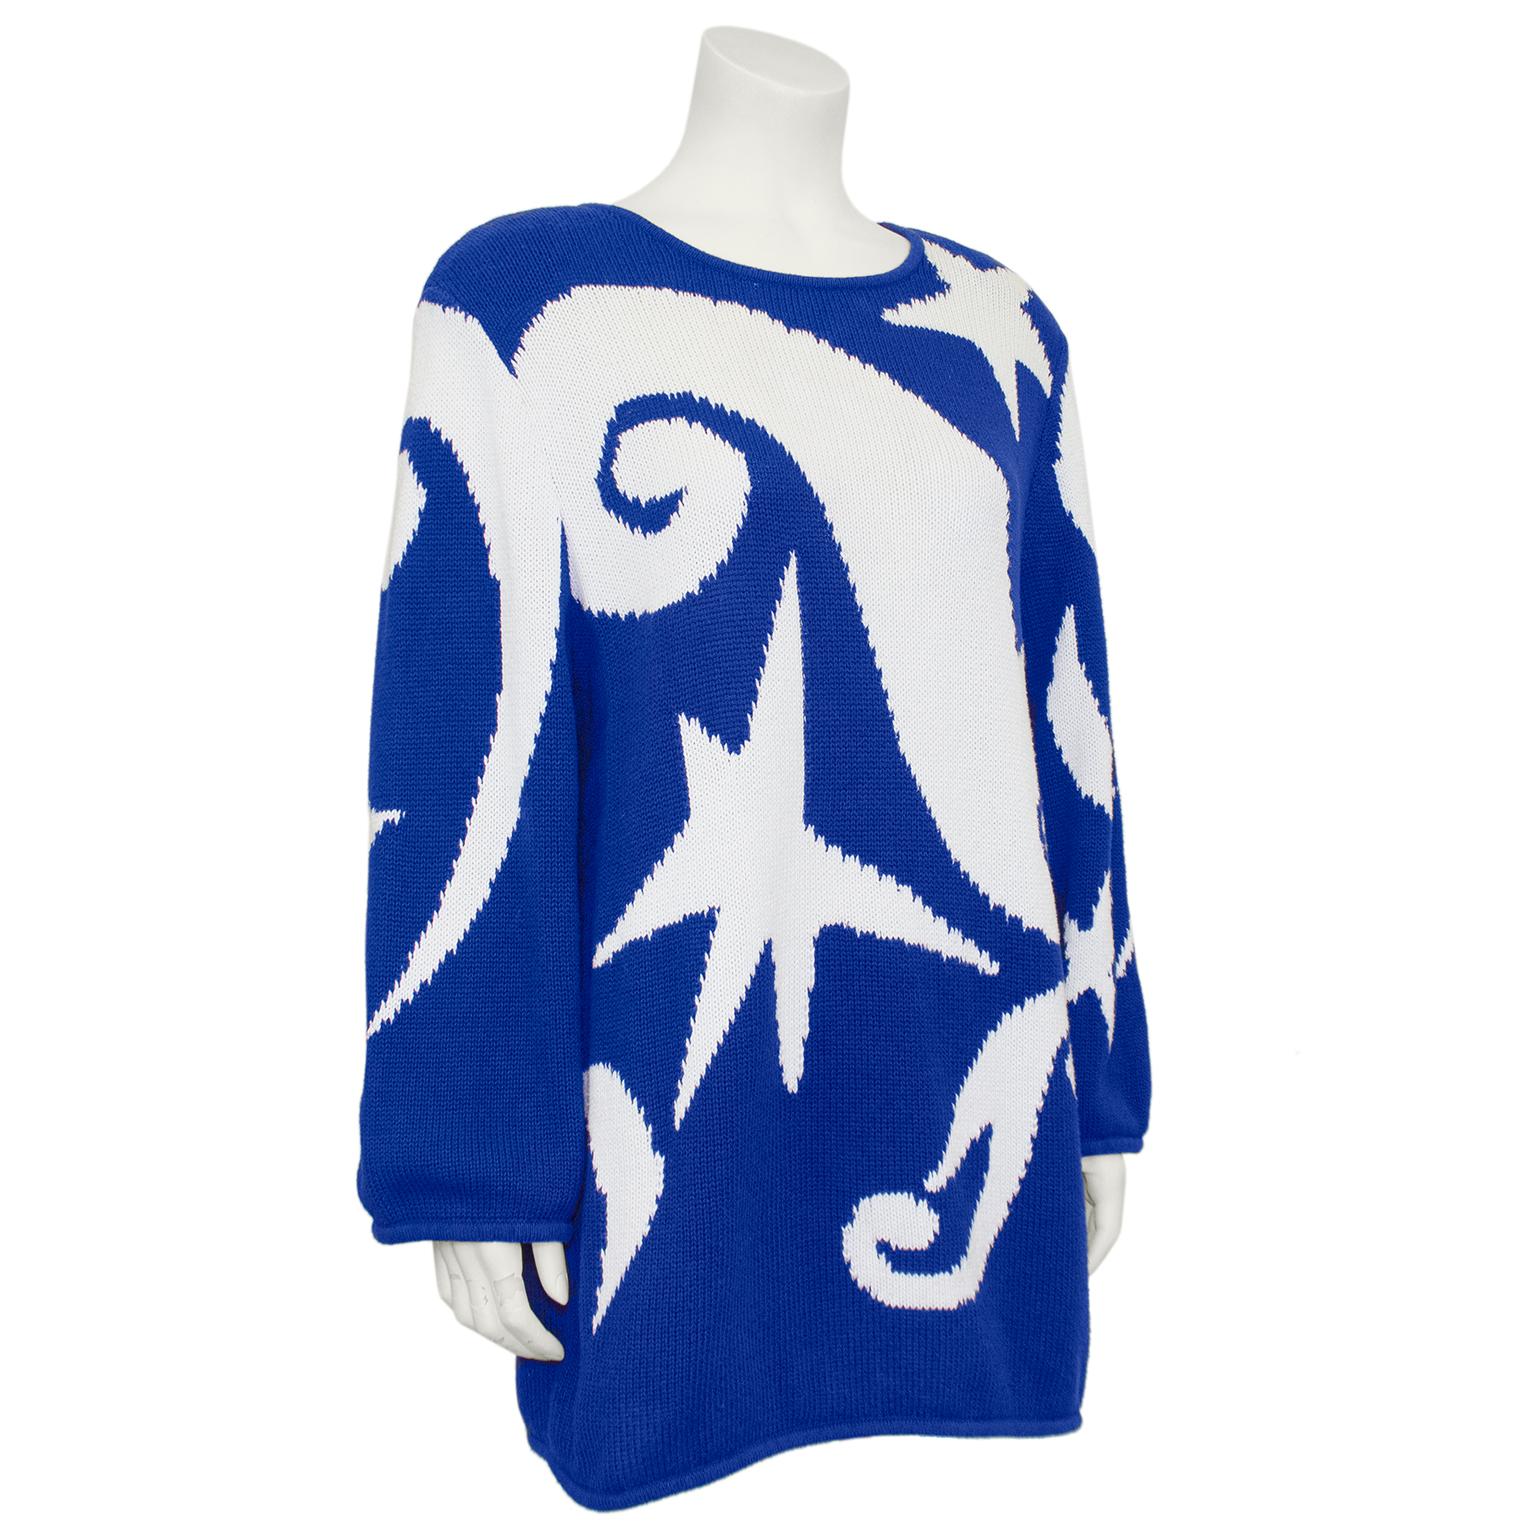 Fun 1980s Valentino graphic sweater inspired by Henri Matisse. Cobalt blue with various large contrasting white abstract stars and swirls. Cotton knit, so it is a great seasonally transitional piece. Slightly oversized and long, can fit more like a